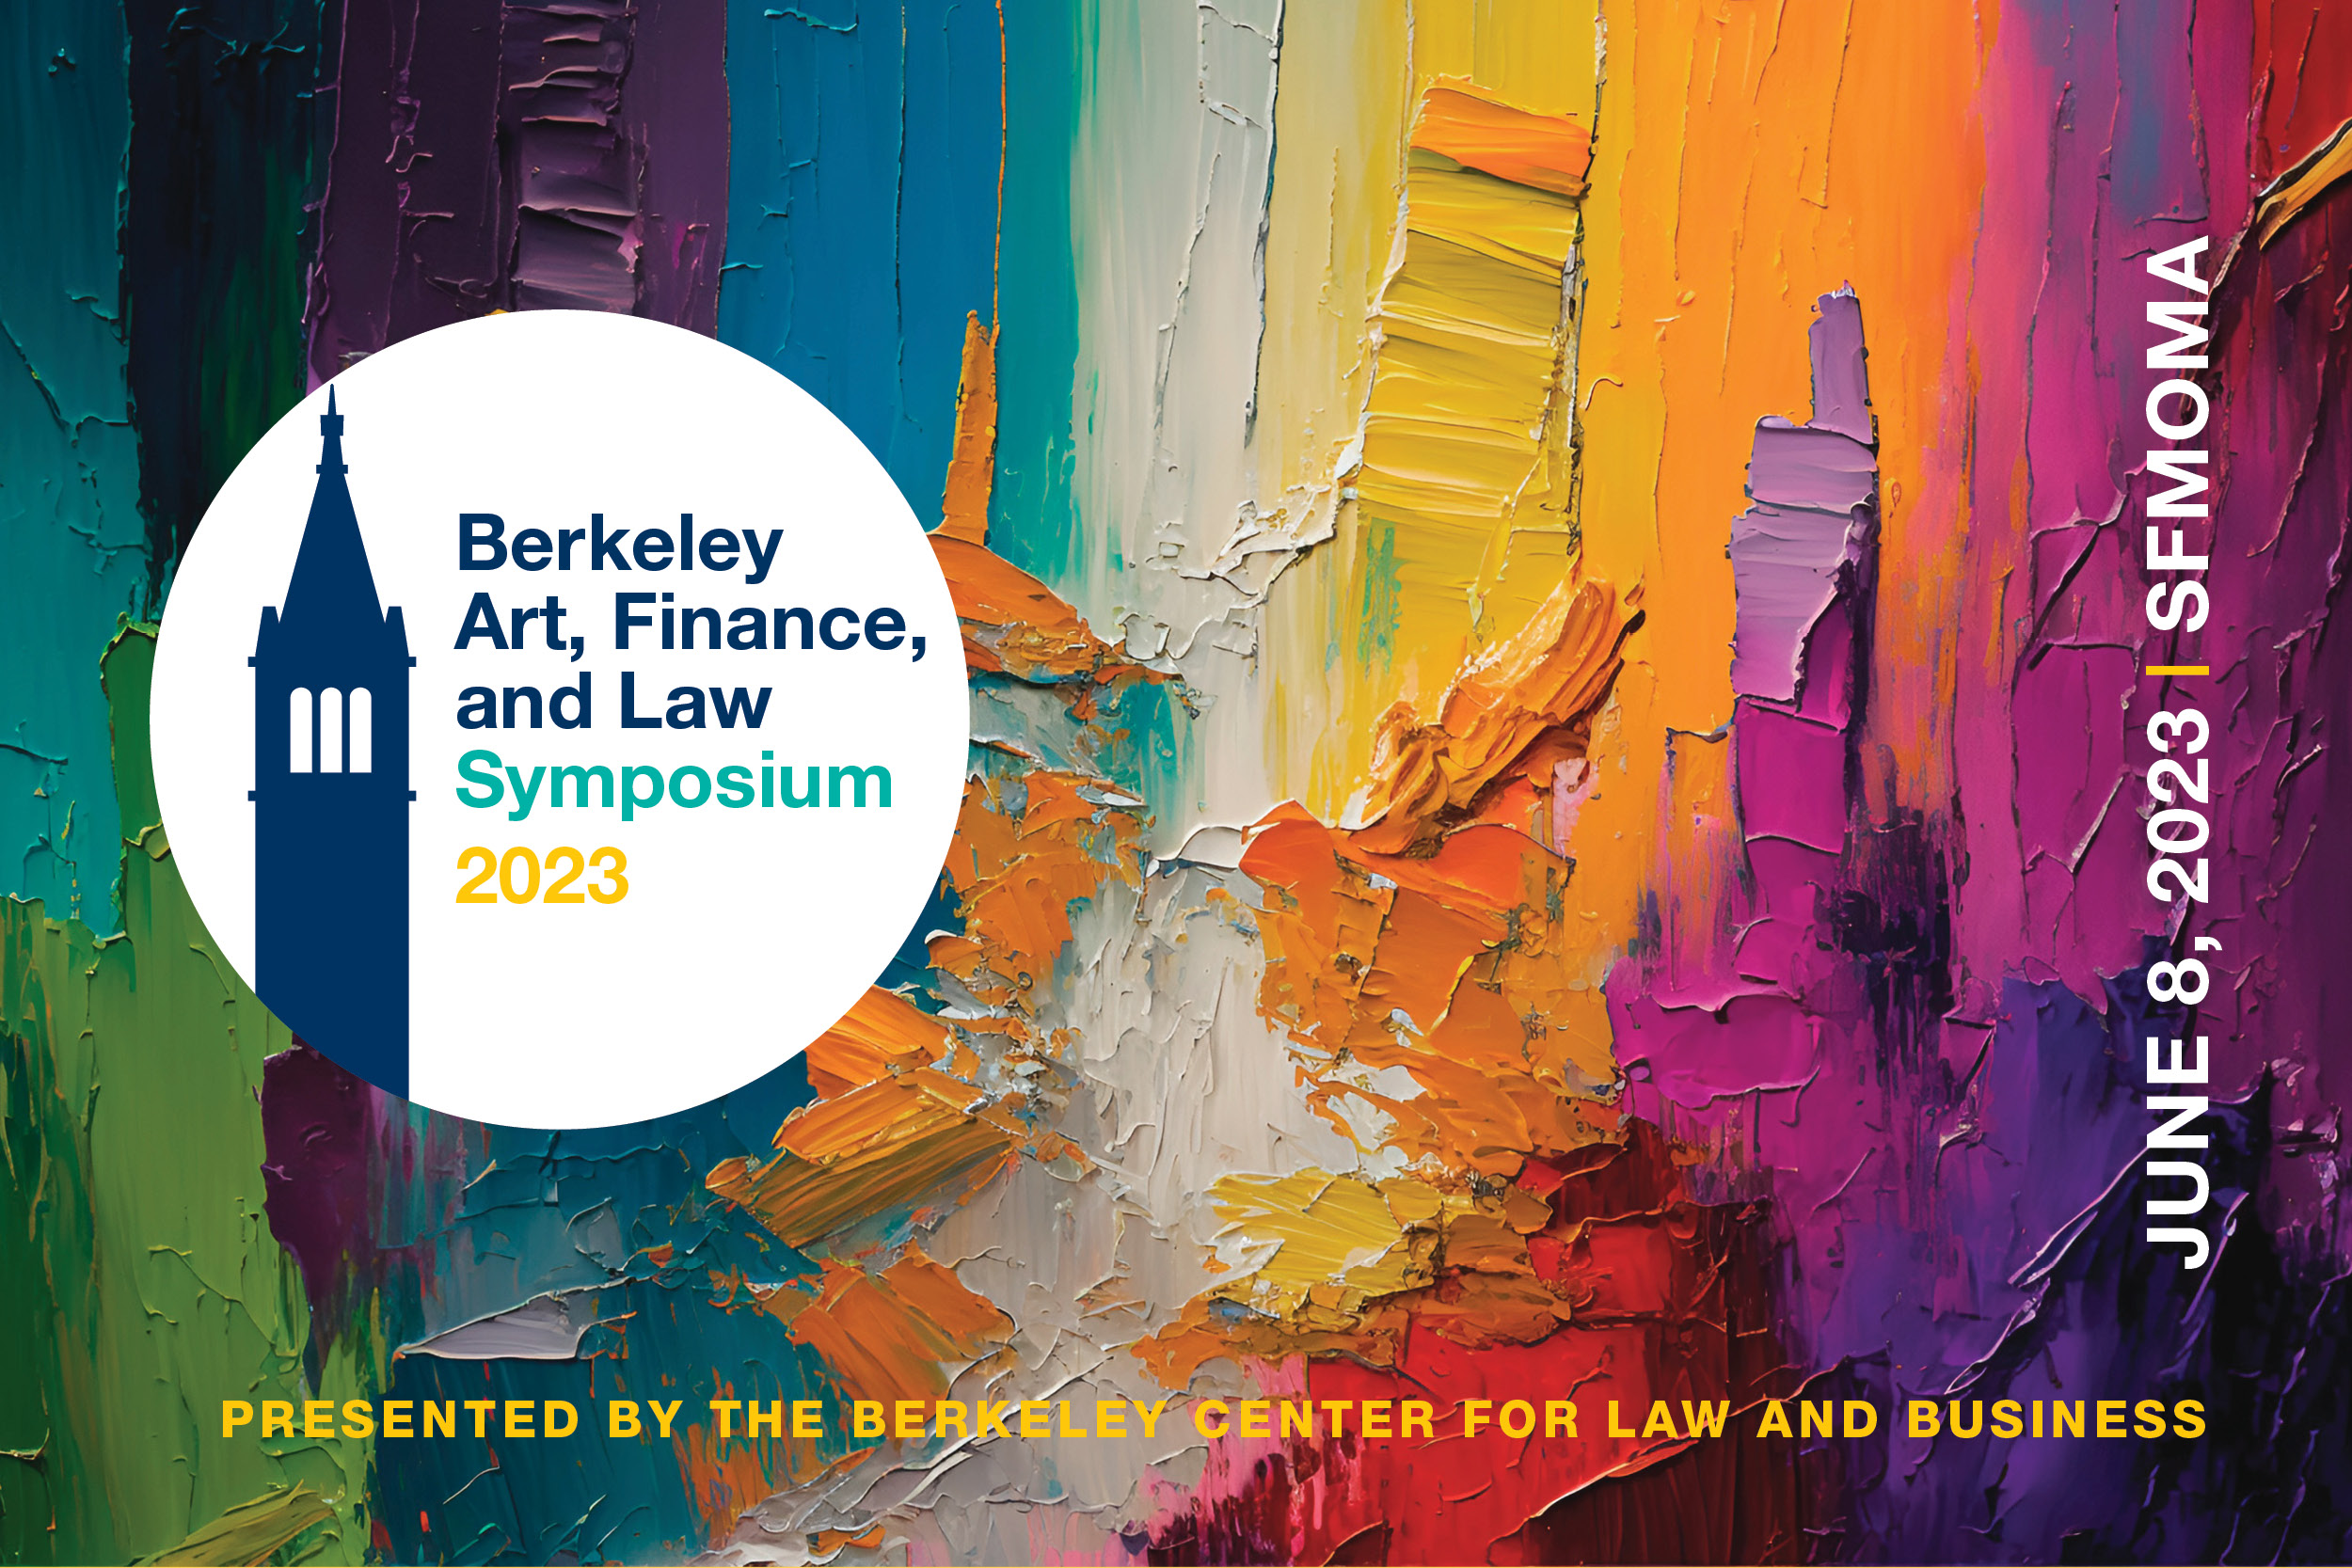 Berkeley, Art, Finance, and Law Symposium 2023: Presented by the Berkeley Center for Law and Business. June 8, 2023 at the SF MOMA.